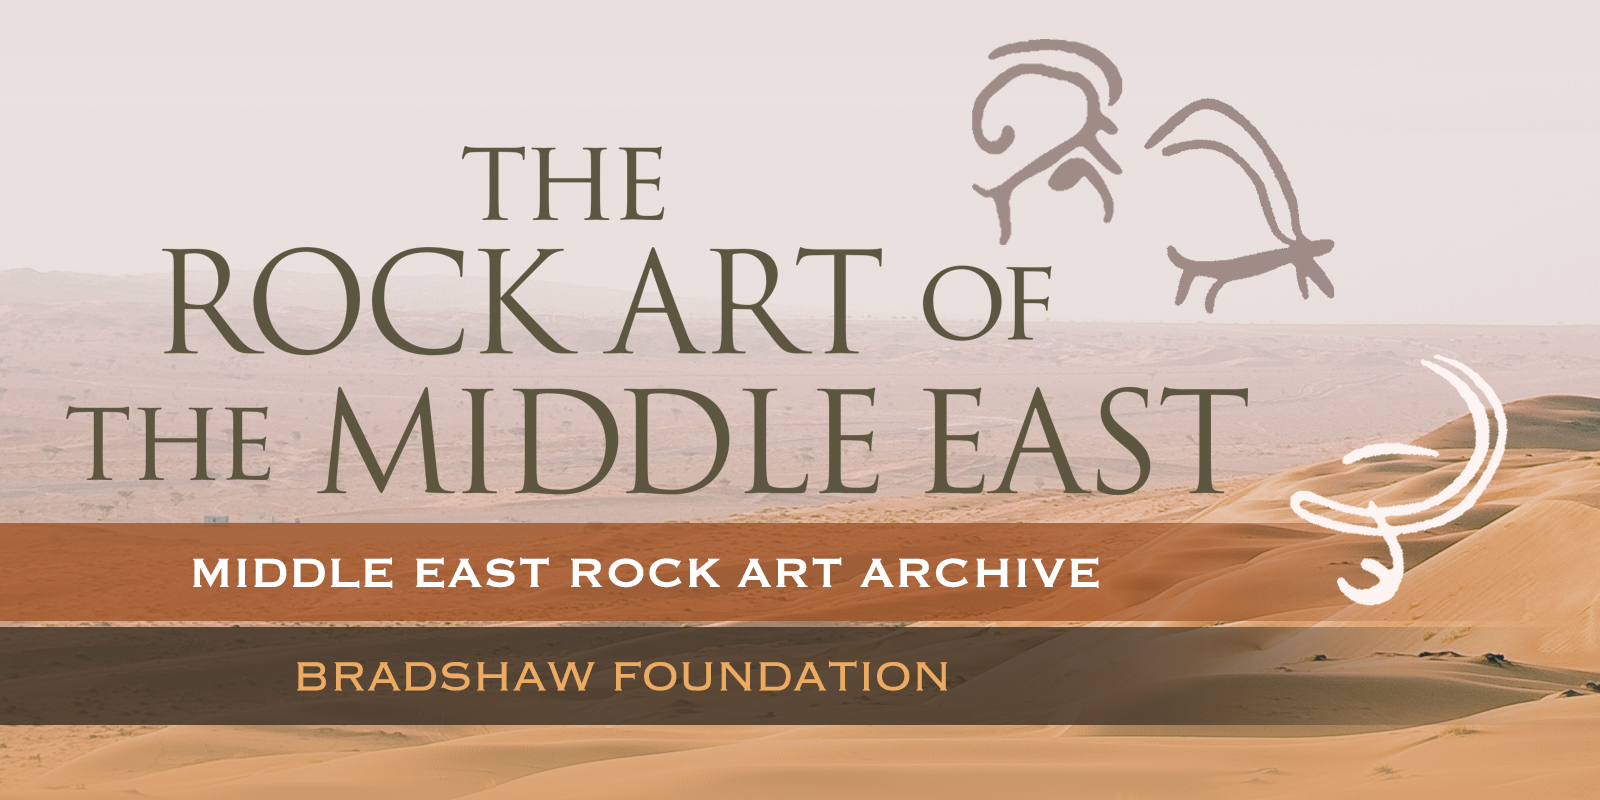 The Middle East Rock Art Archive Bradshaw Foundation